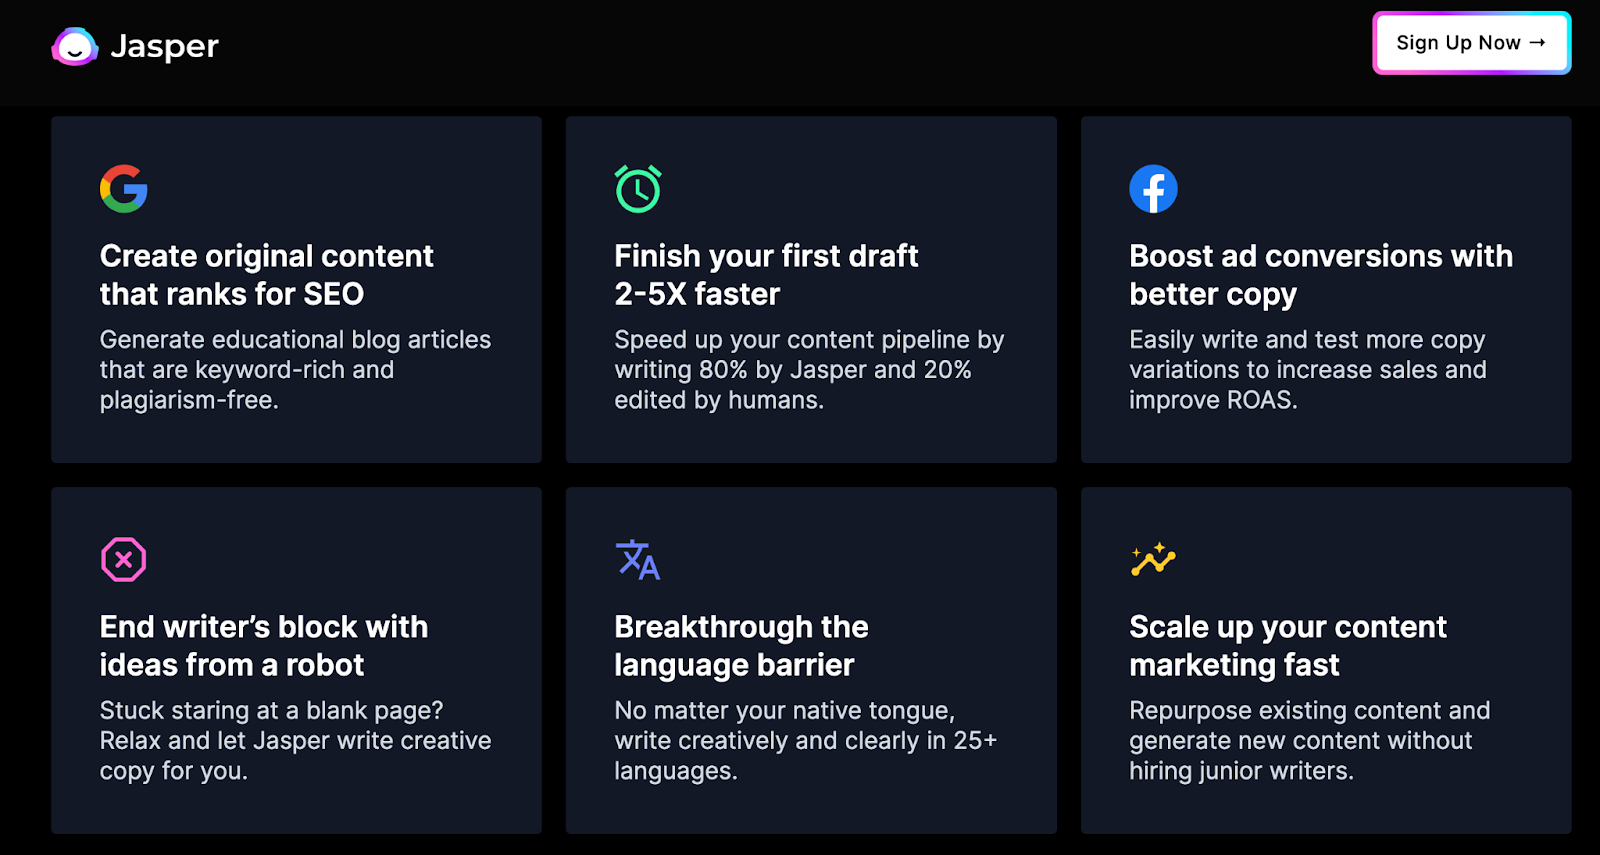 jasper's landing page displaying list of features including boosting ad conversions, create seo-optimized content, and finishing a draft faster